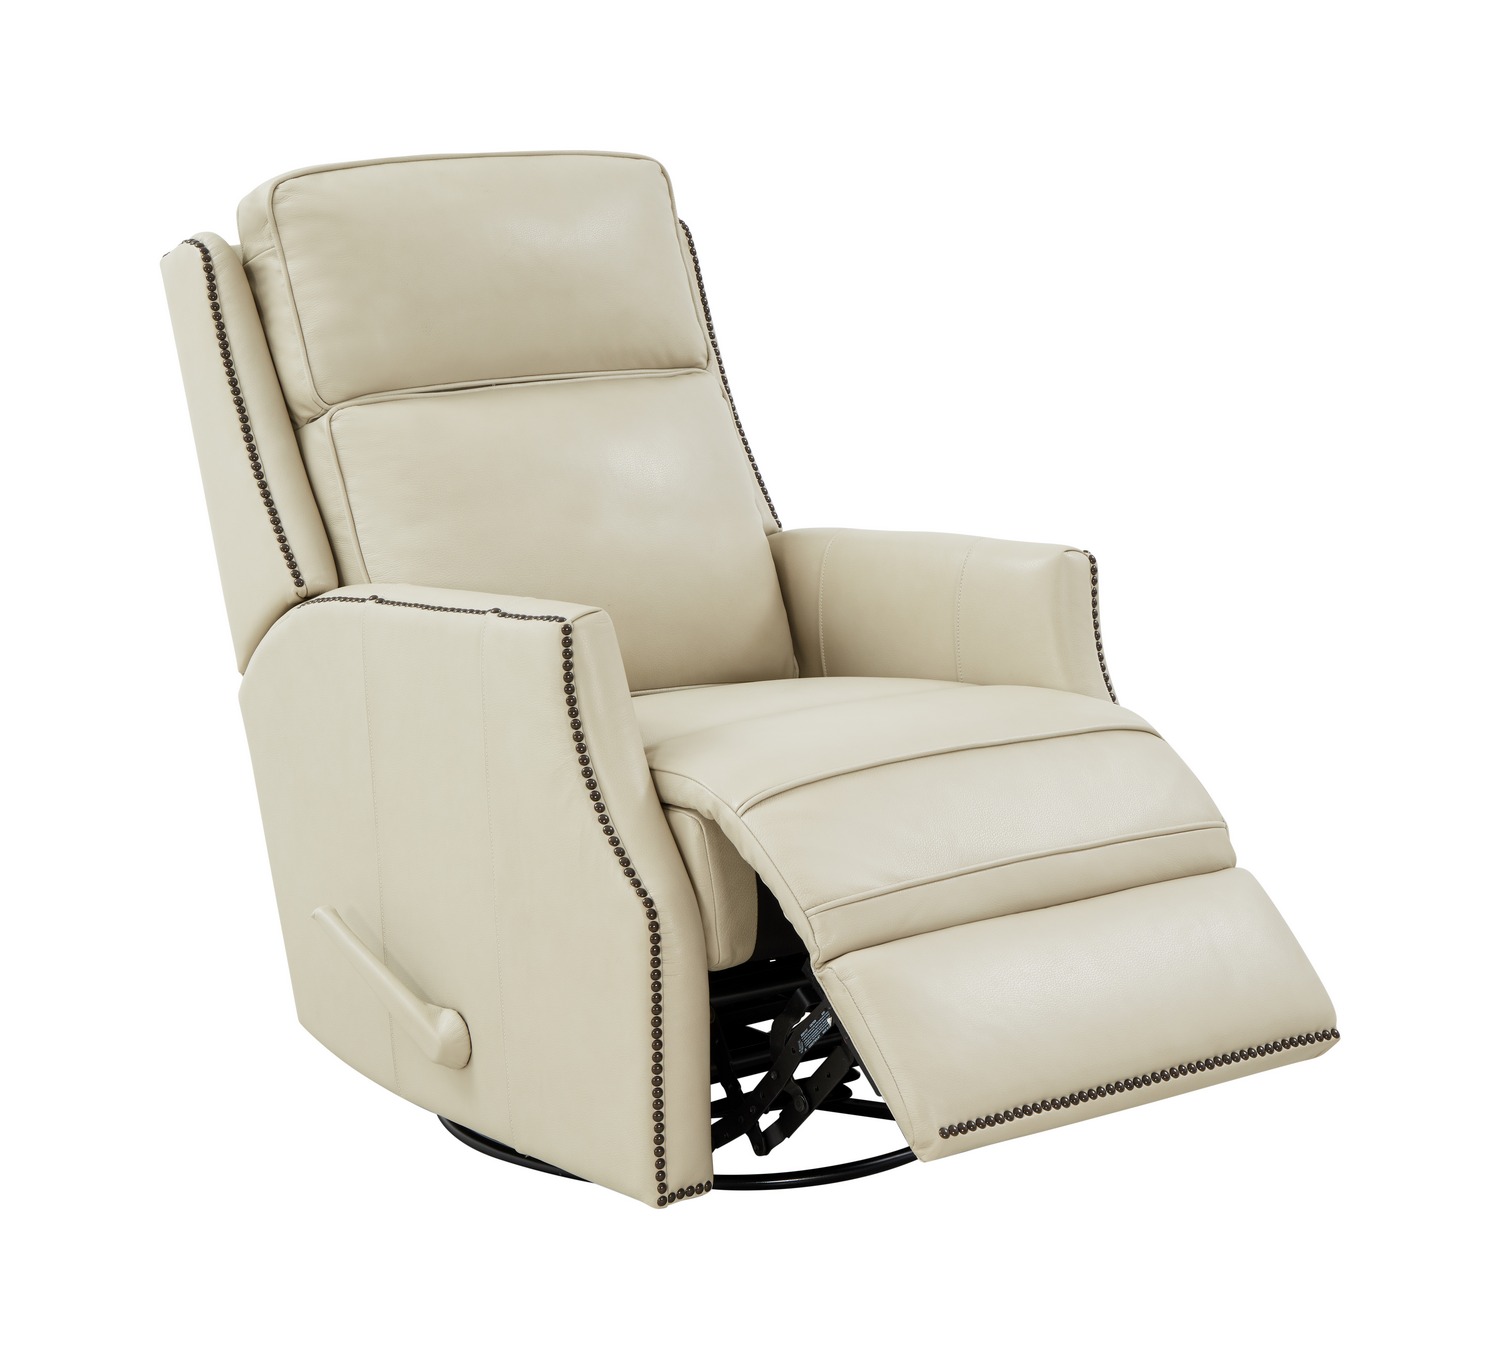 Barcalounger Aniston Swivel Glider Recliner Chair - Barone Parchment/All Leather